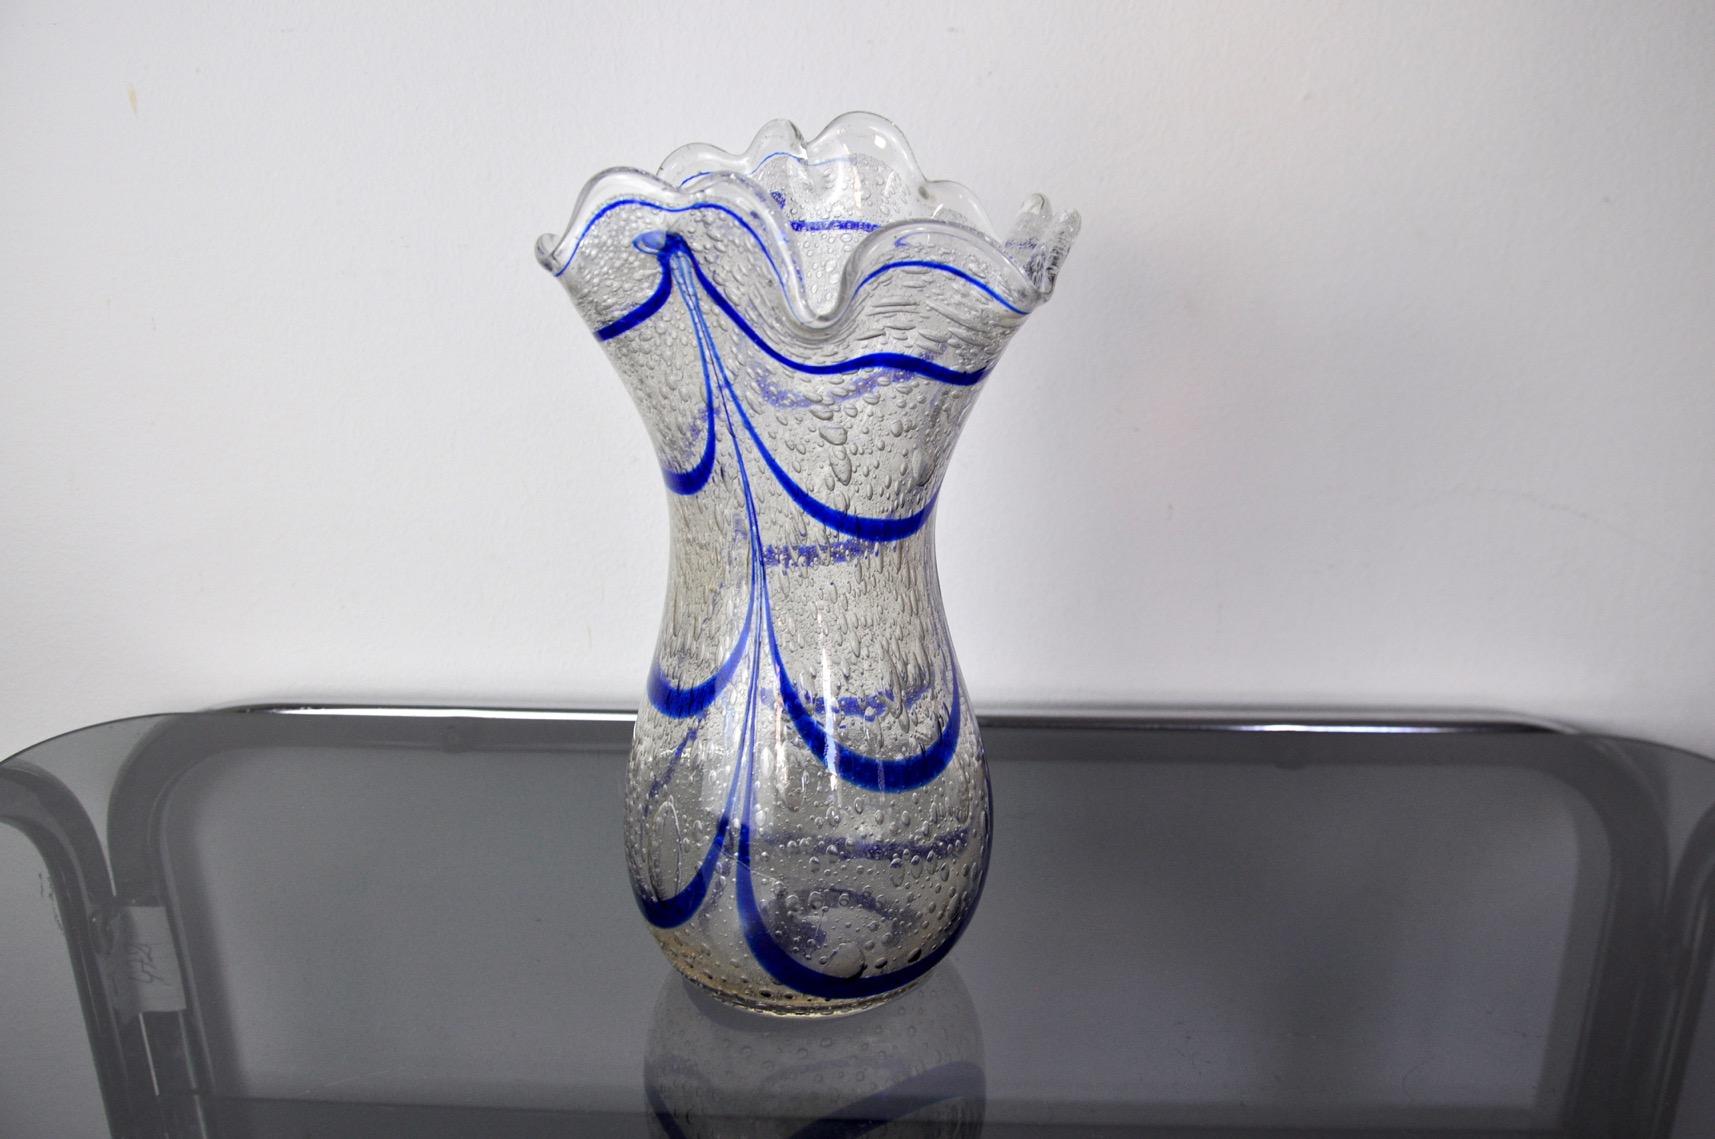 Vase in blue and transparent Italian art glass Sommerso blown by hand.
Attributed to seguso, murano Italy, and 1960s.
This colorful vase has a beautiful design with drawn details and a ribbed edge according to the Sommerso technique.
Use it as a